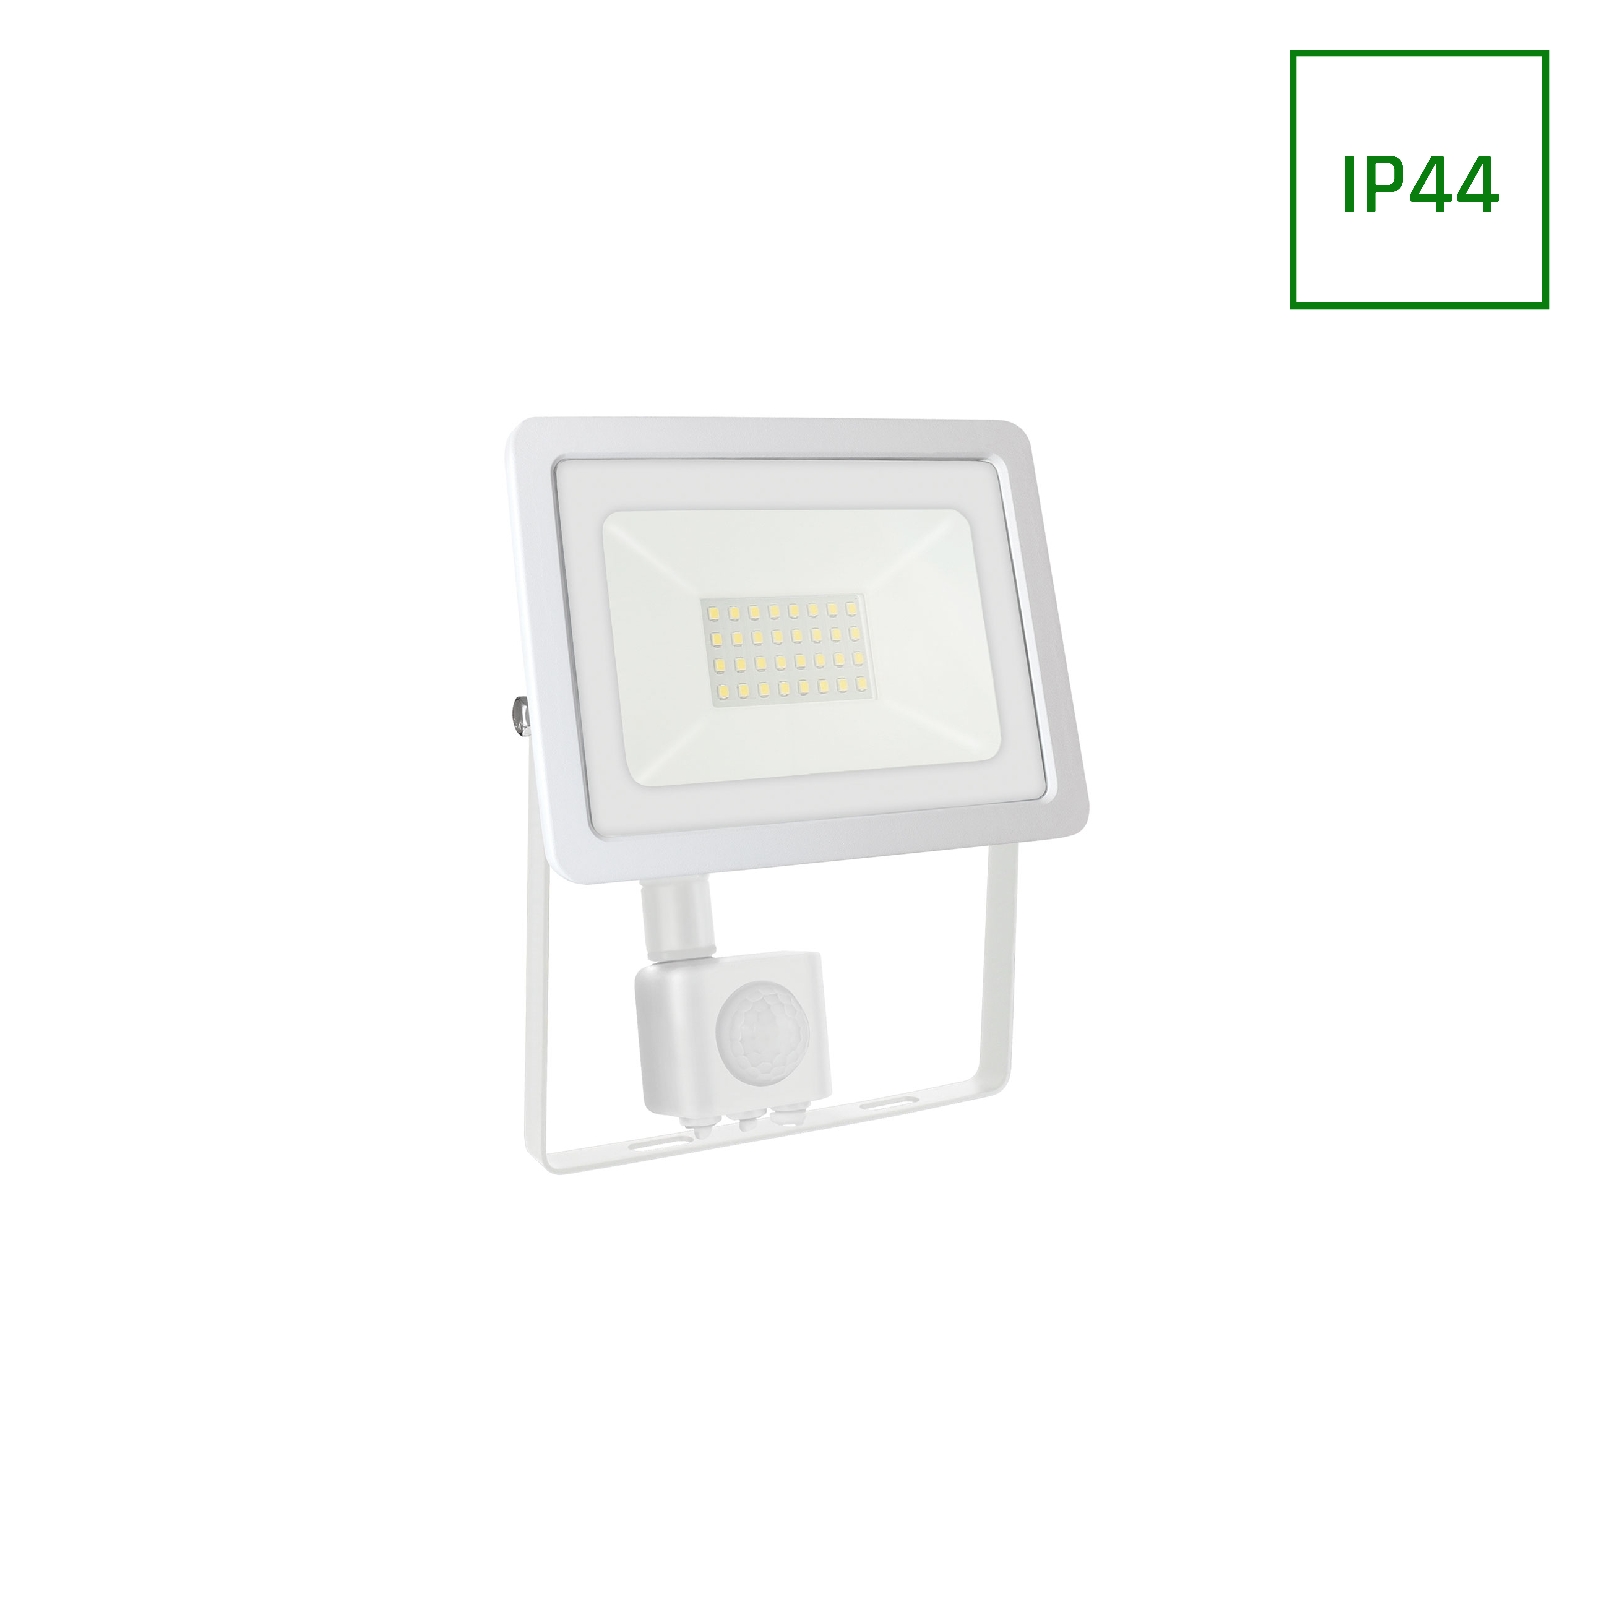 NOCTIS LUX2 SMD 230V 30W IP44 NW biely+senzor